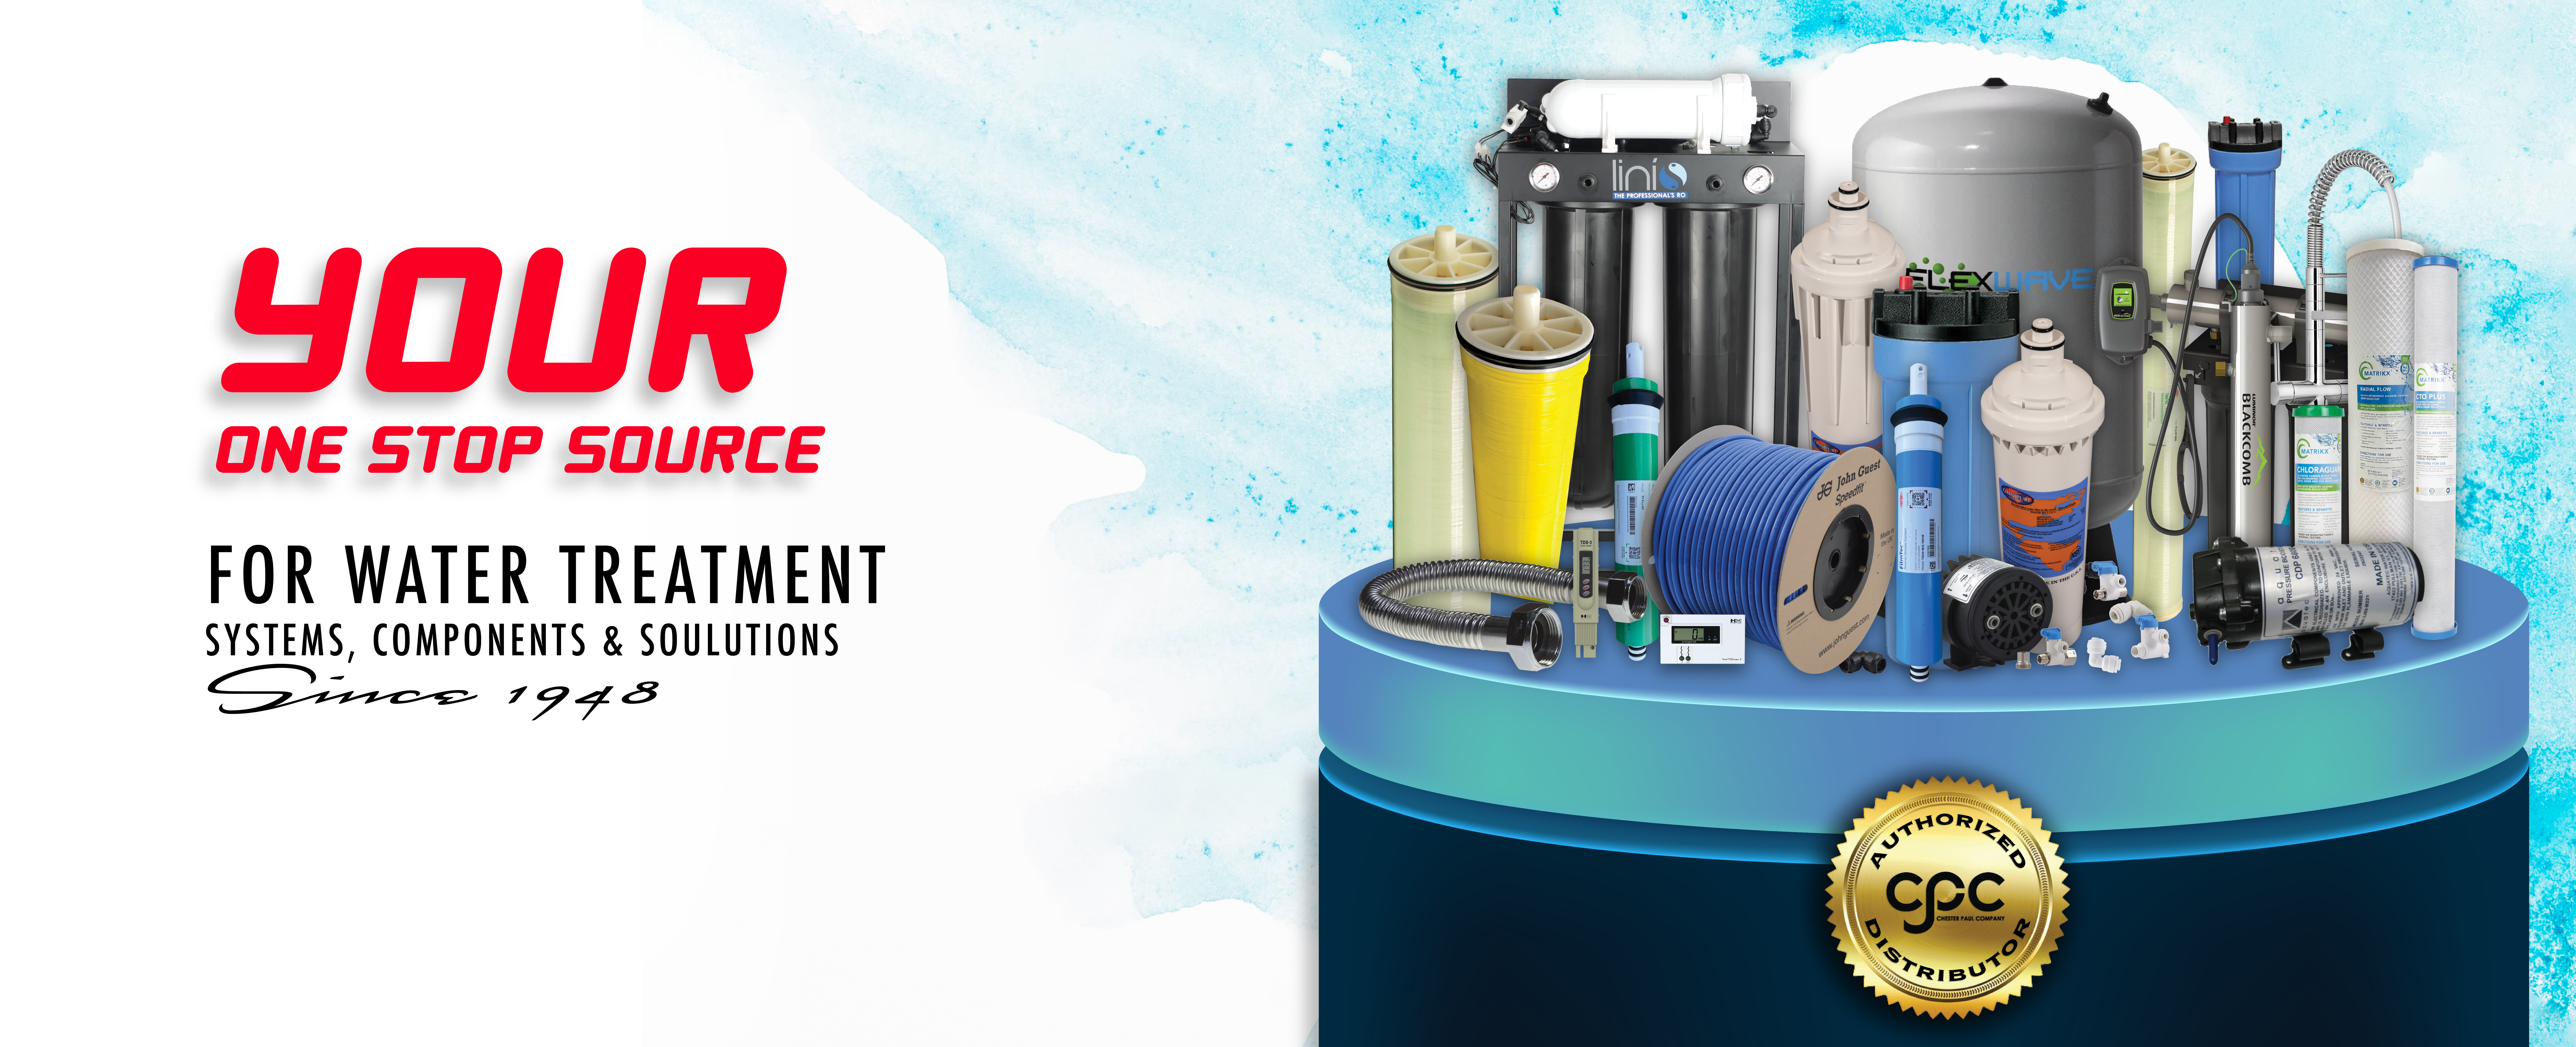 Your one stop source for water treatment systems, components, & solutions since 1948.